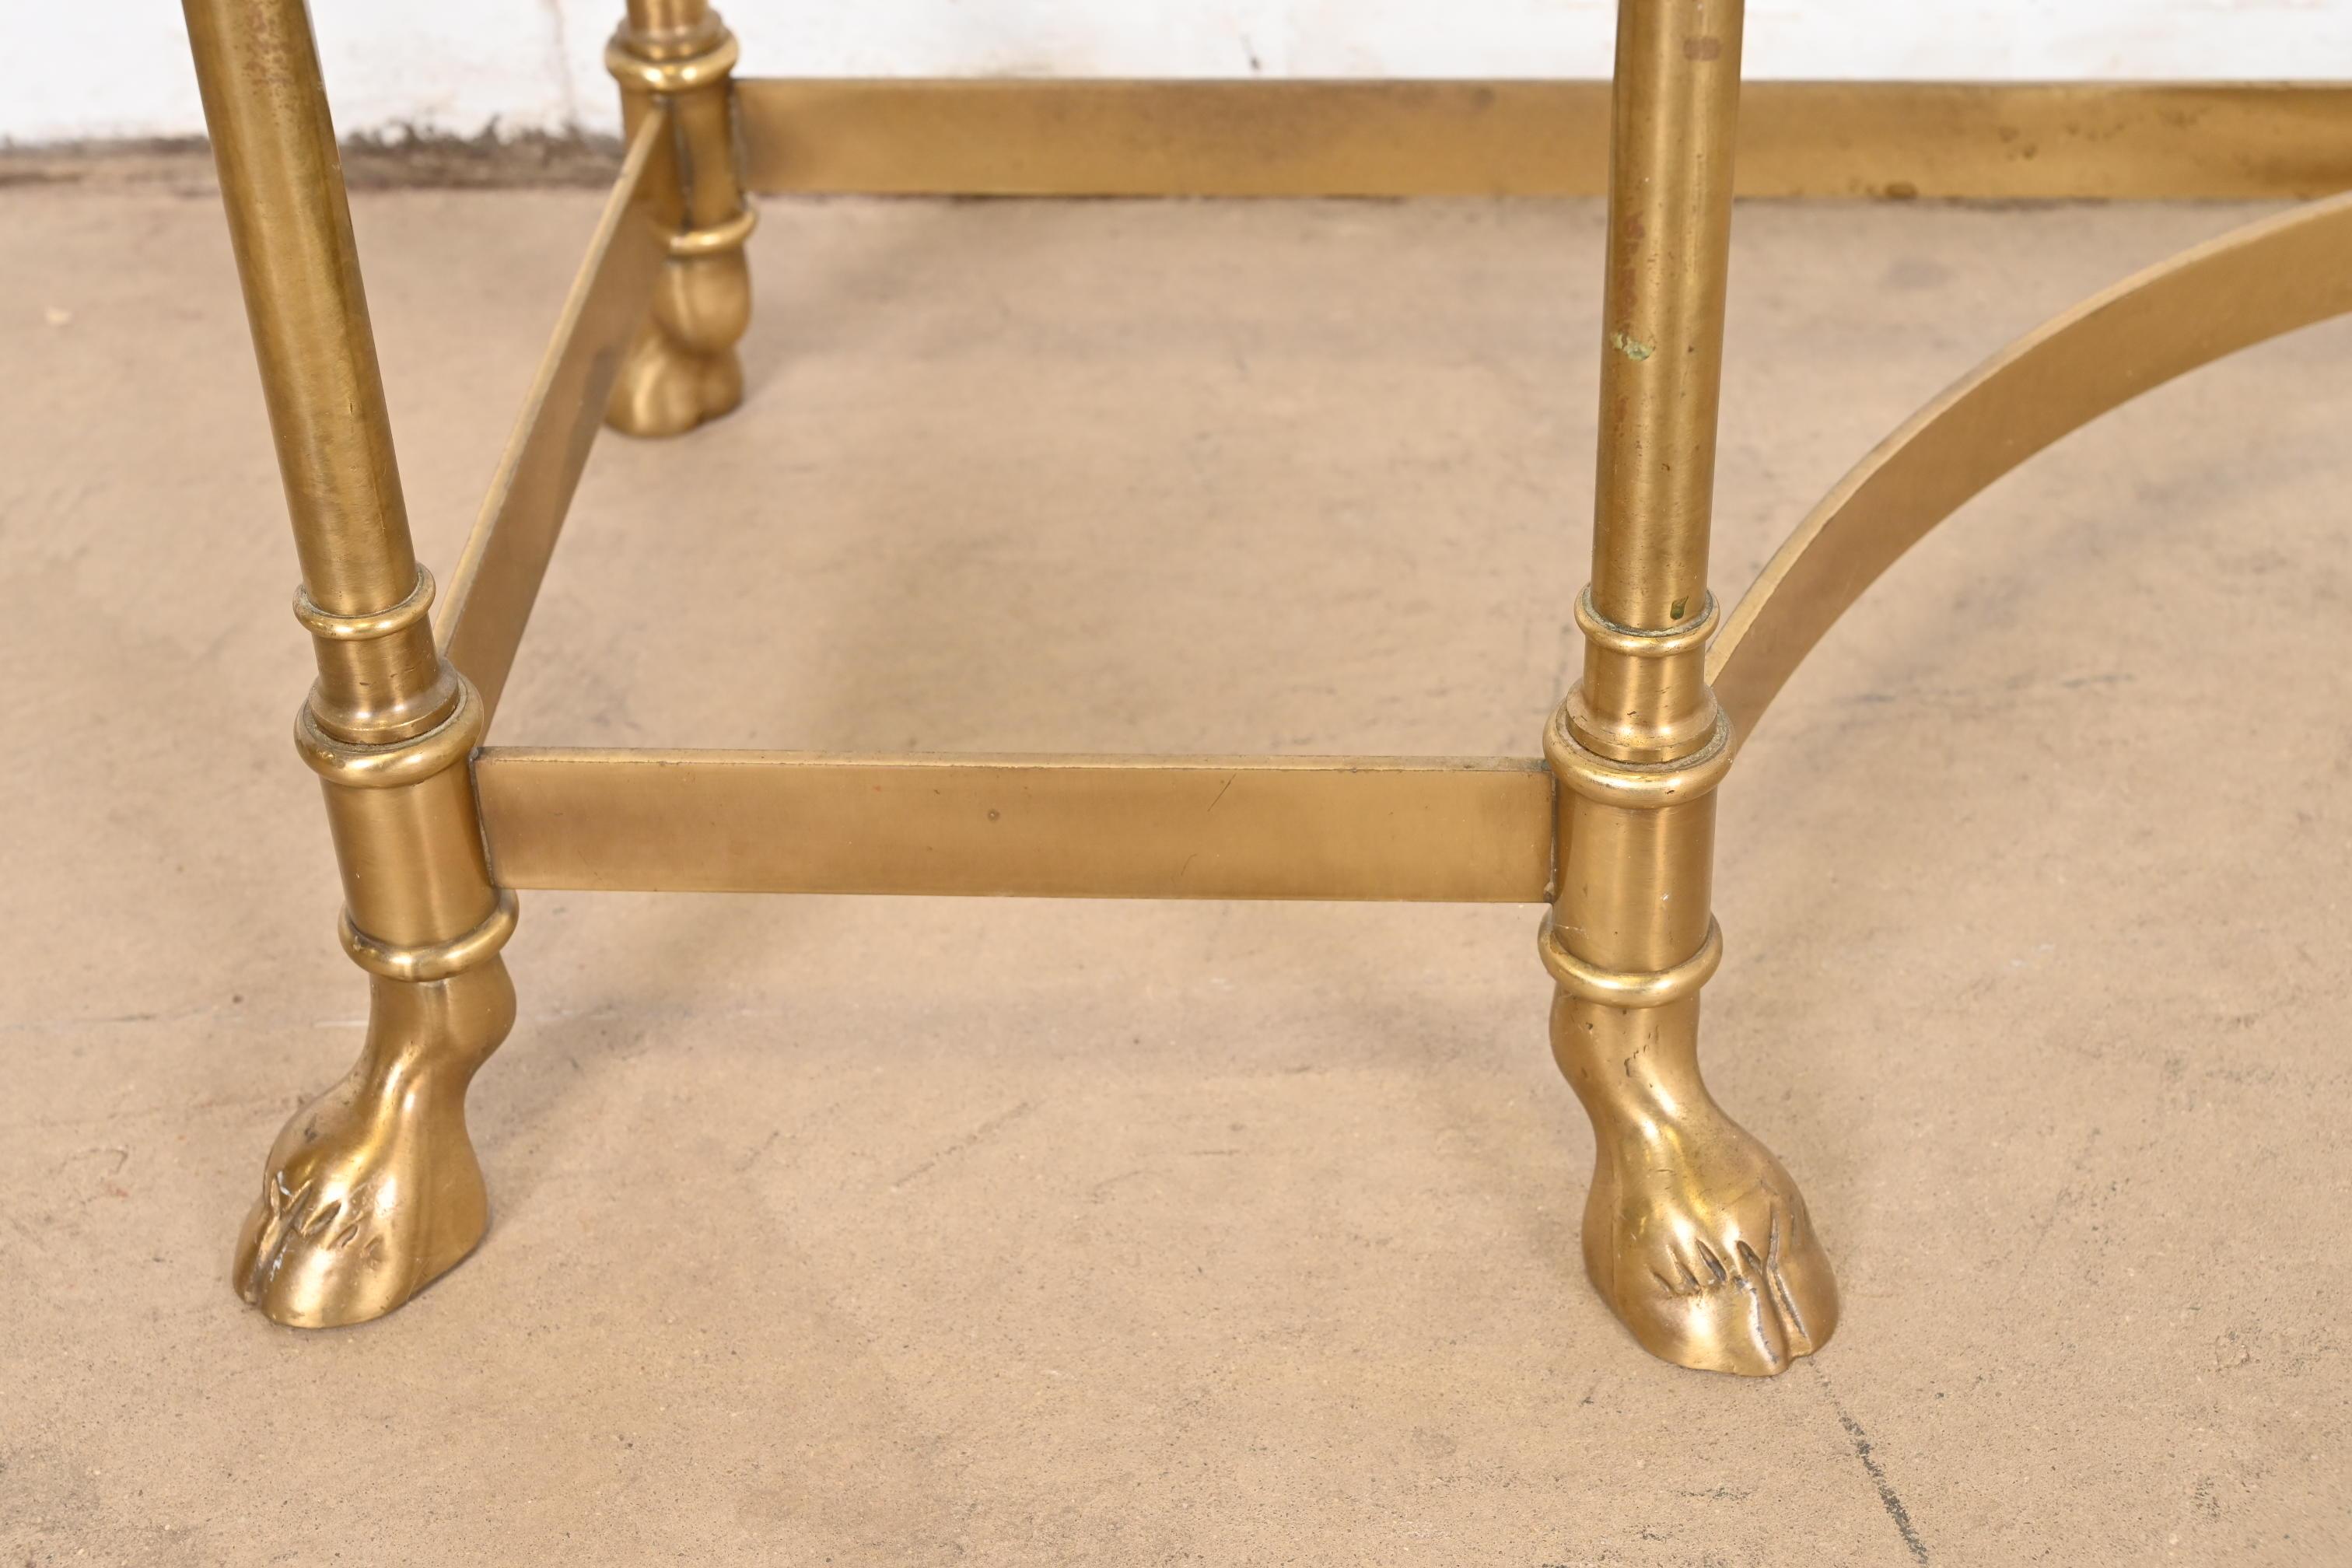 Labarge Hollywood Regency Brass and Glass Hooved Feet Console Table, Circa 1960s For Sale 3